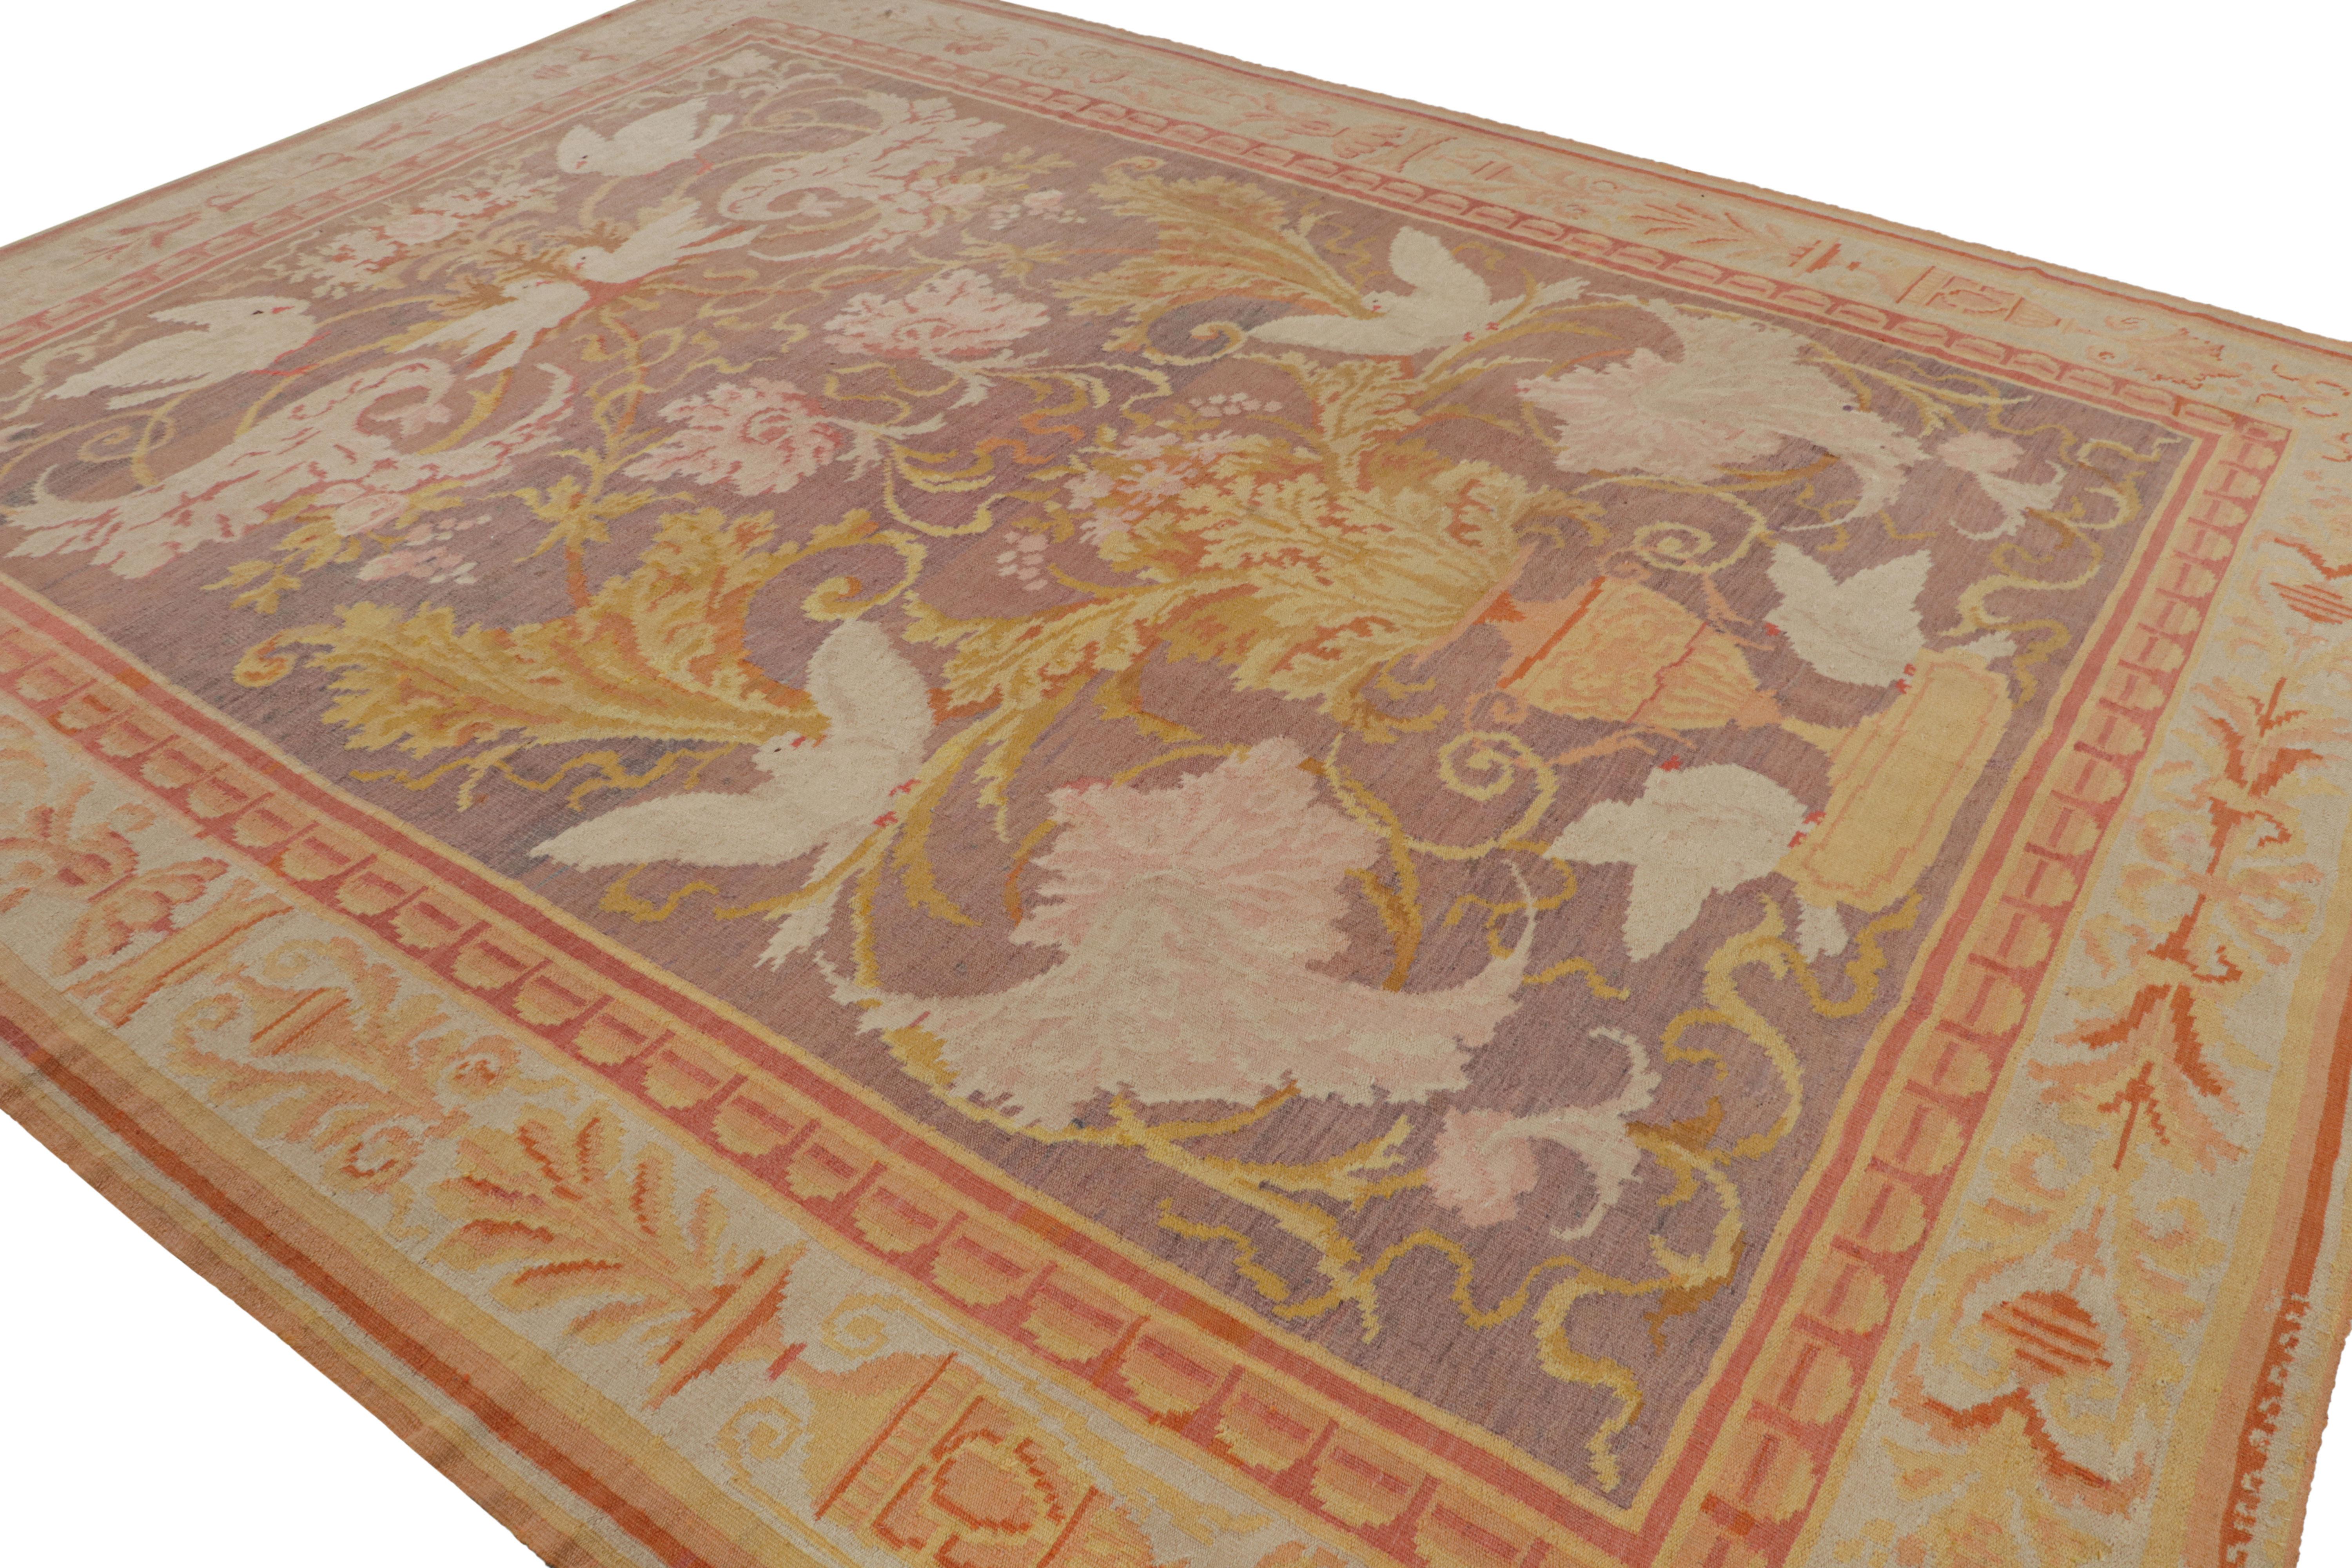 Hand-knotted in wool, circa 1920-1930, this 11x14 rare antique Bessarabian rug features a purple field and creamy border, underscoring elegant floral patterns and pictorials of birds around a vase. 

On the Design: 

Connoisseurs will admire a